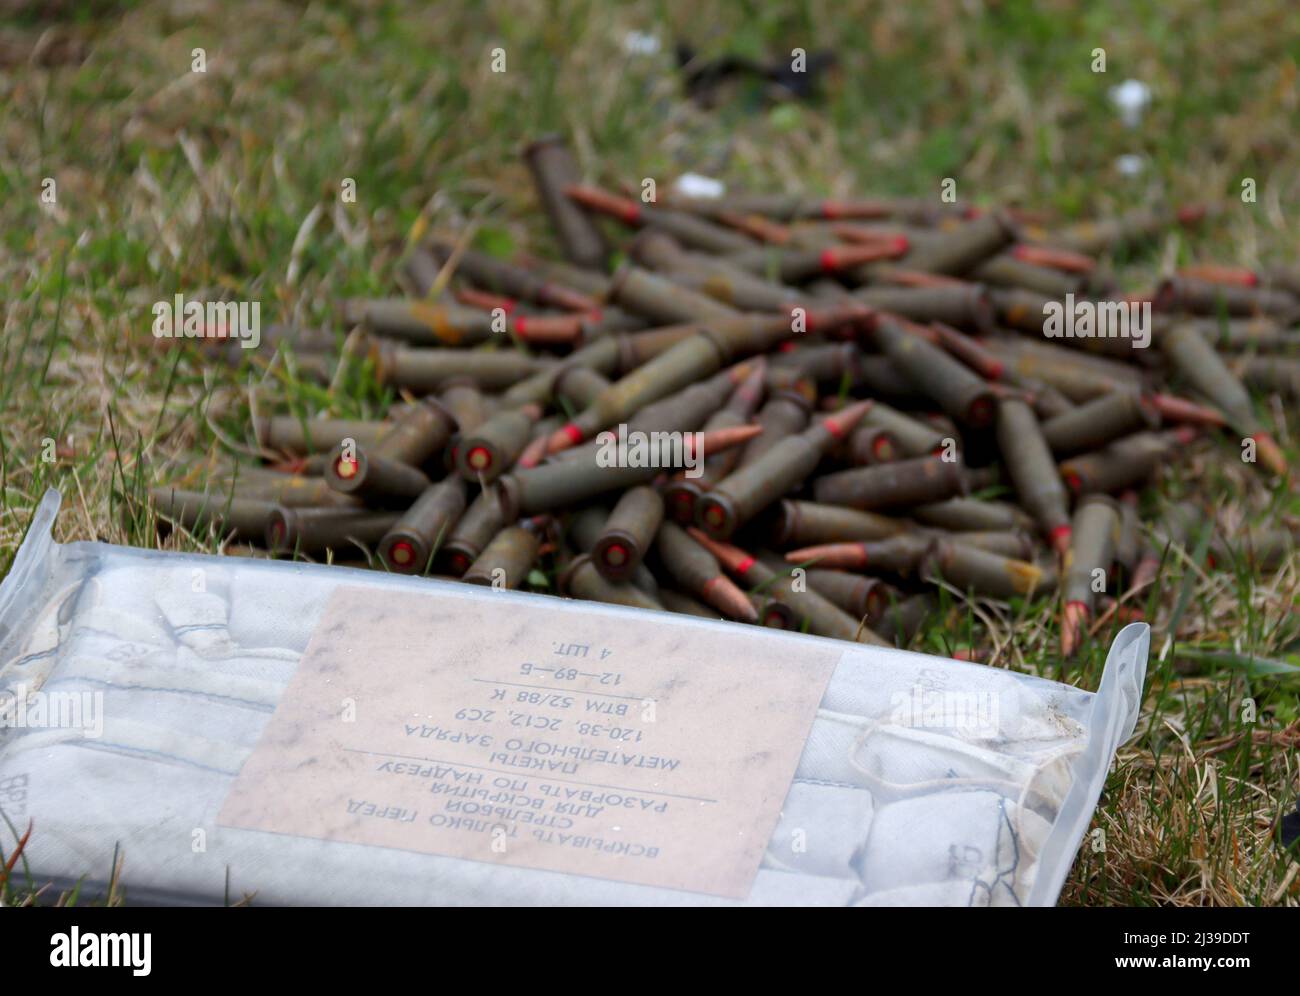 BUCHA, UKRAINE - APRIL 5, 2022 - Ammunition and a package of propellant left behind by Russian invanders are gathered on the ground in liberated Bucha Stock Photo